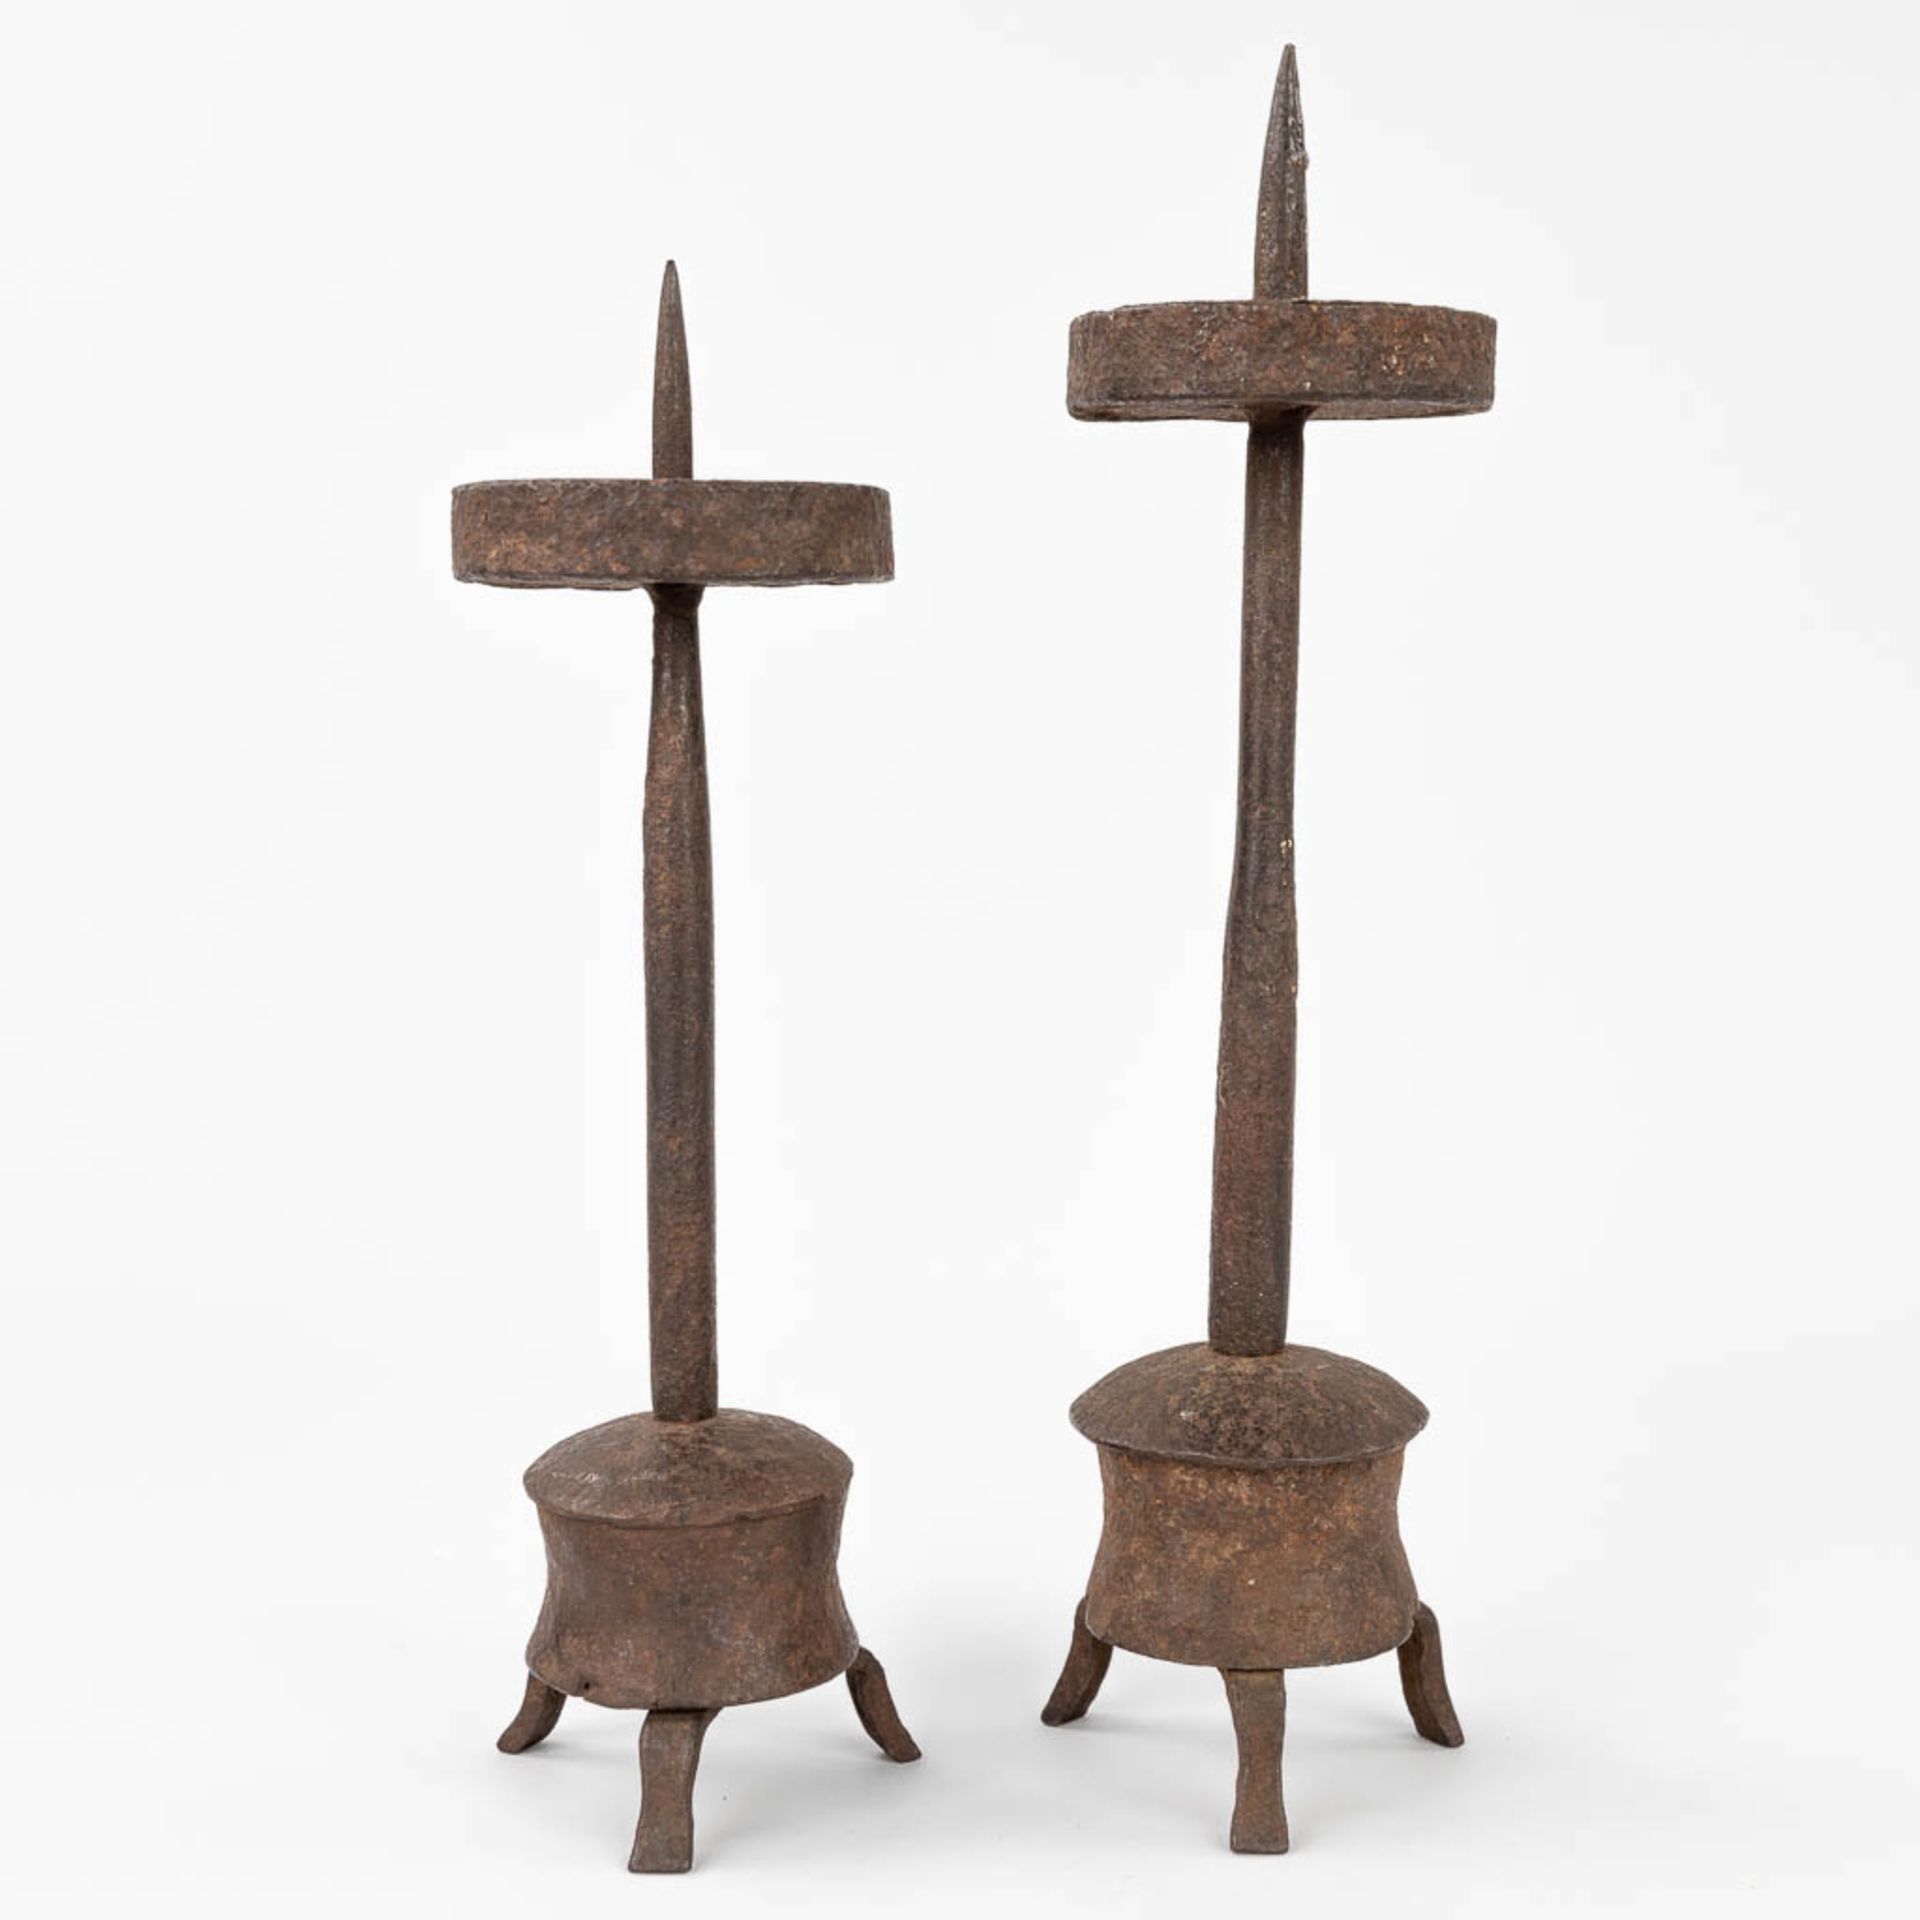 A pair of antique candlesticks made of wrought iron. Probably made in Southern Europe. (H:34 cm) - Image 8 of 16